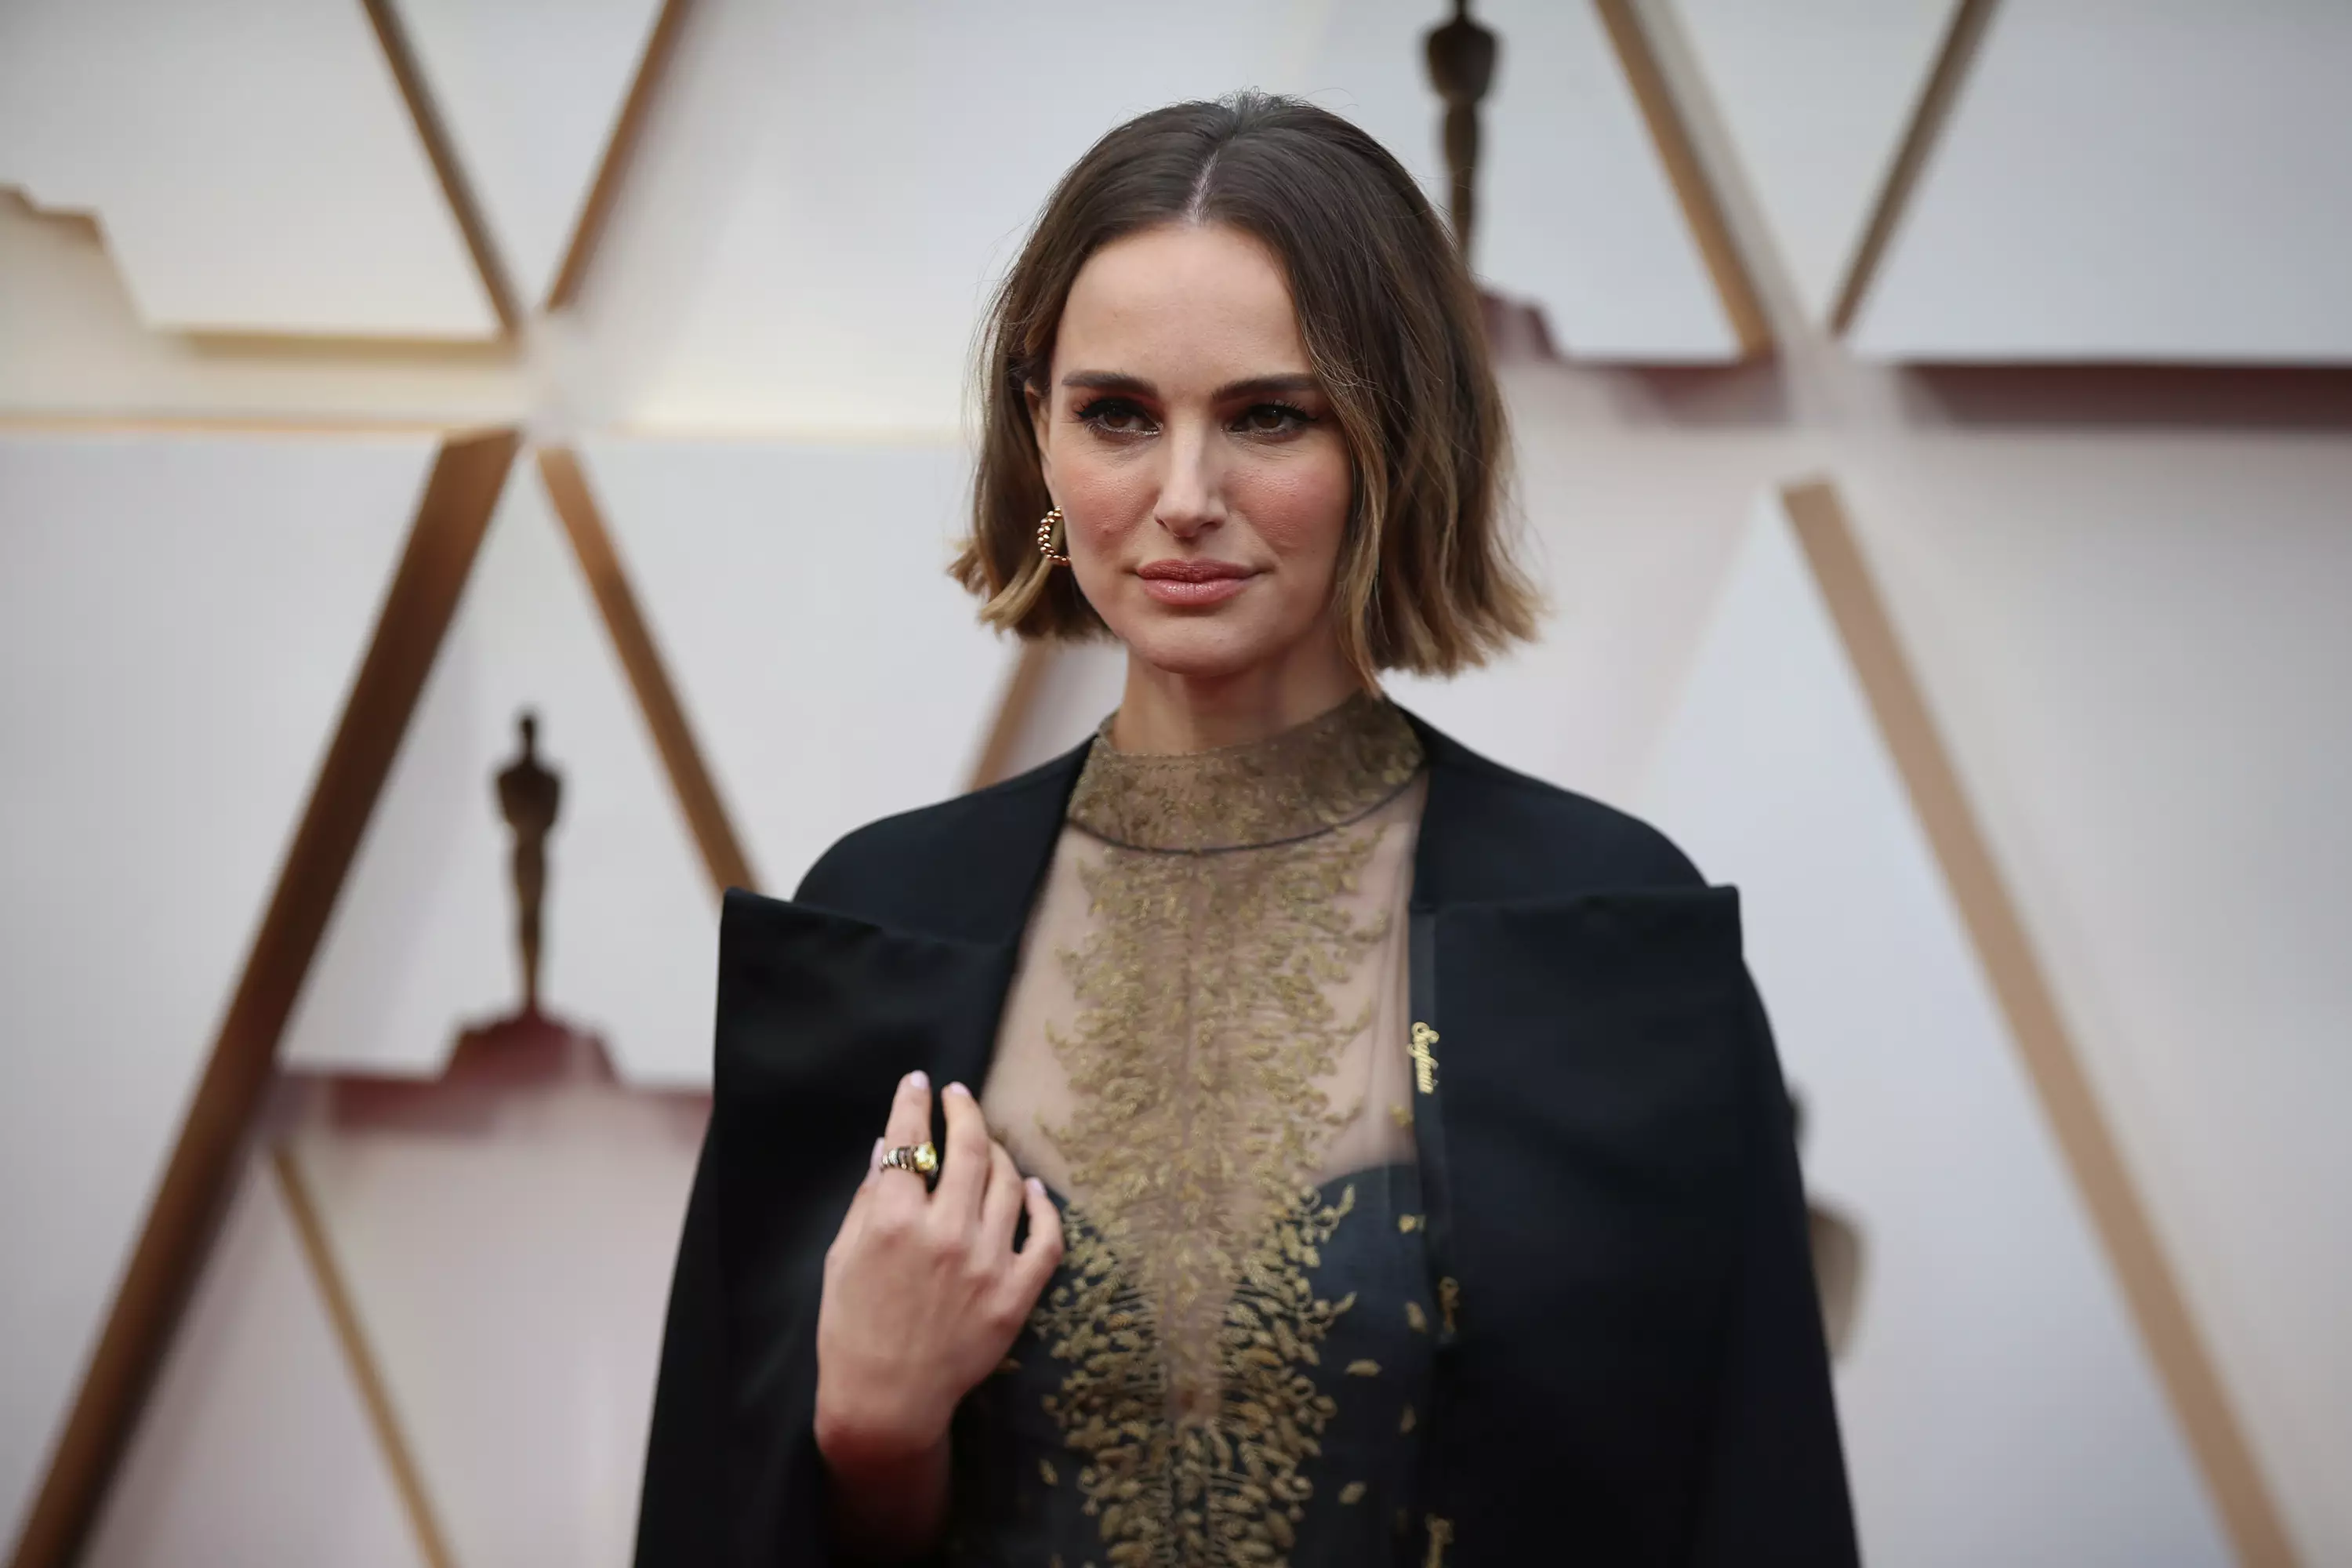 Portman has opened up about how being sexualised as a child 'took away' from her sexuality.